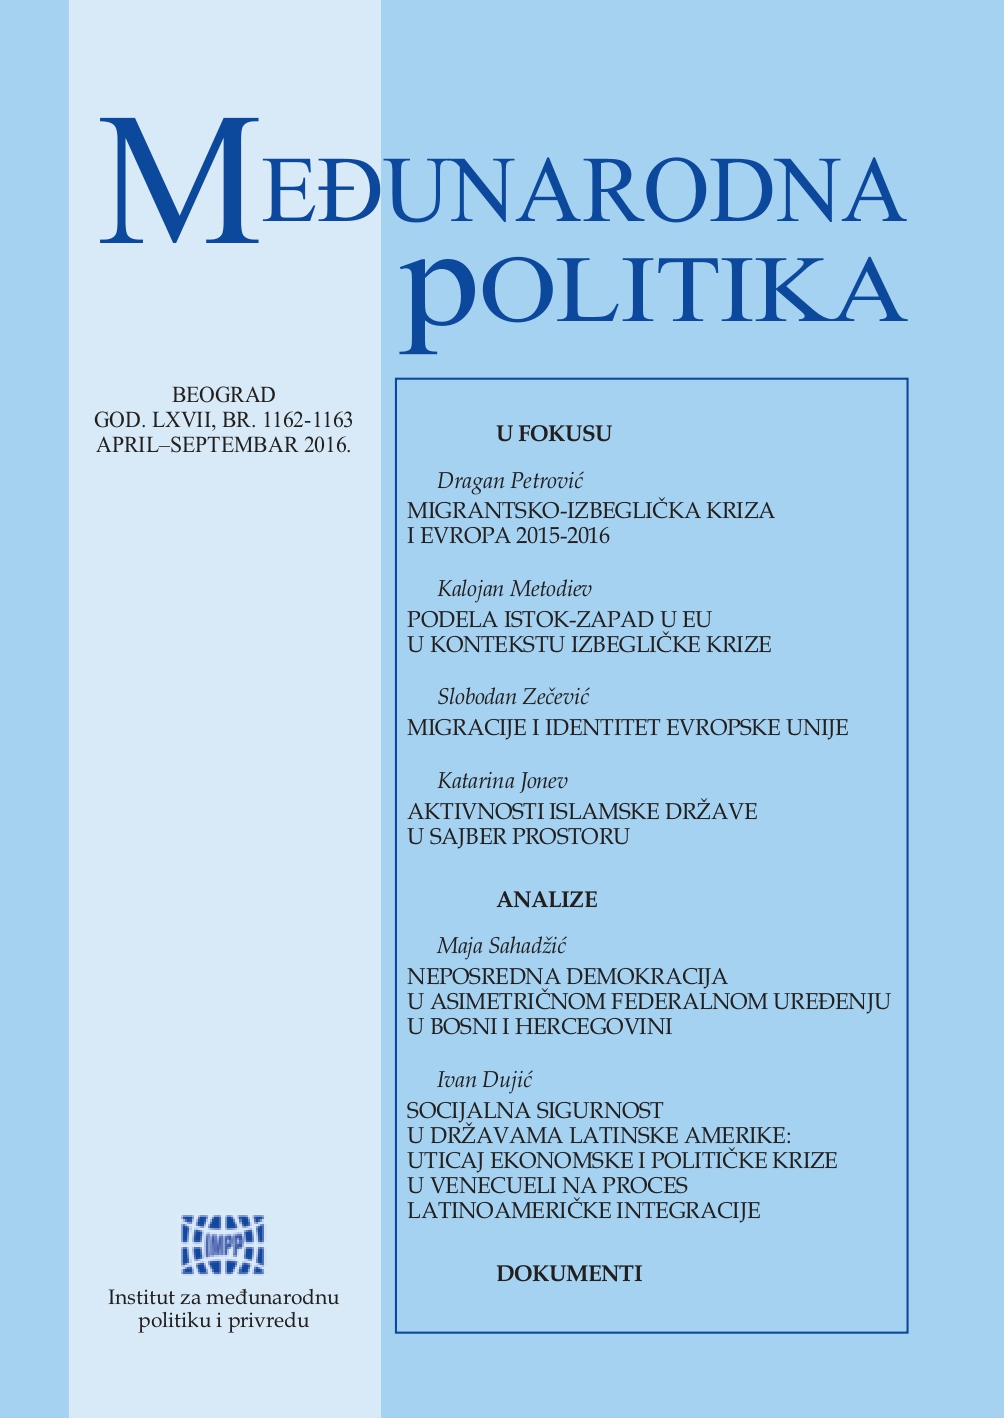 Social security in Latin America: the impact of economic and poliitcal crisis in Venezuela on the integration process among South American countries, and lessons for Serbia Cover Image